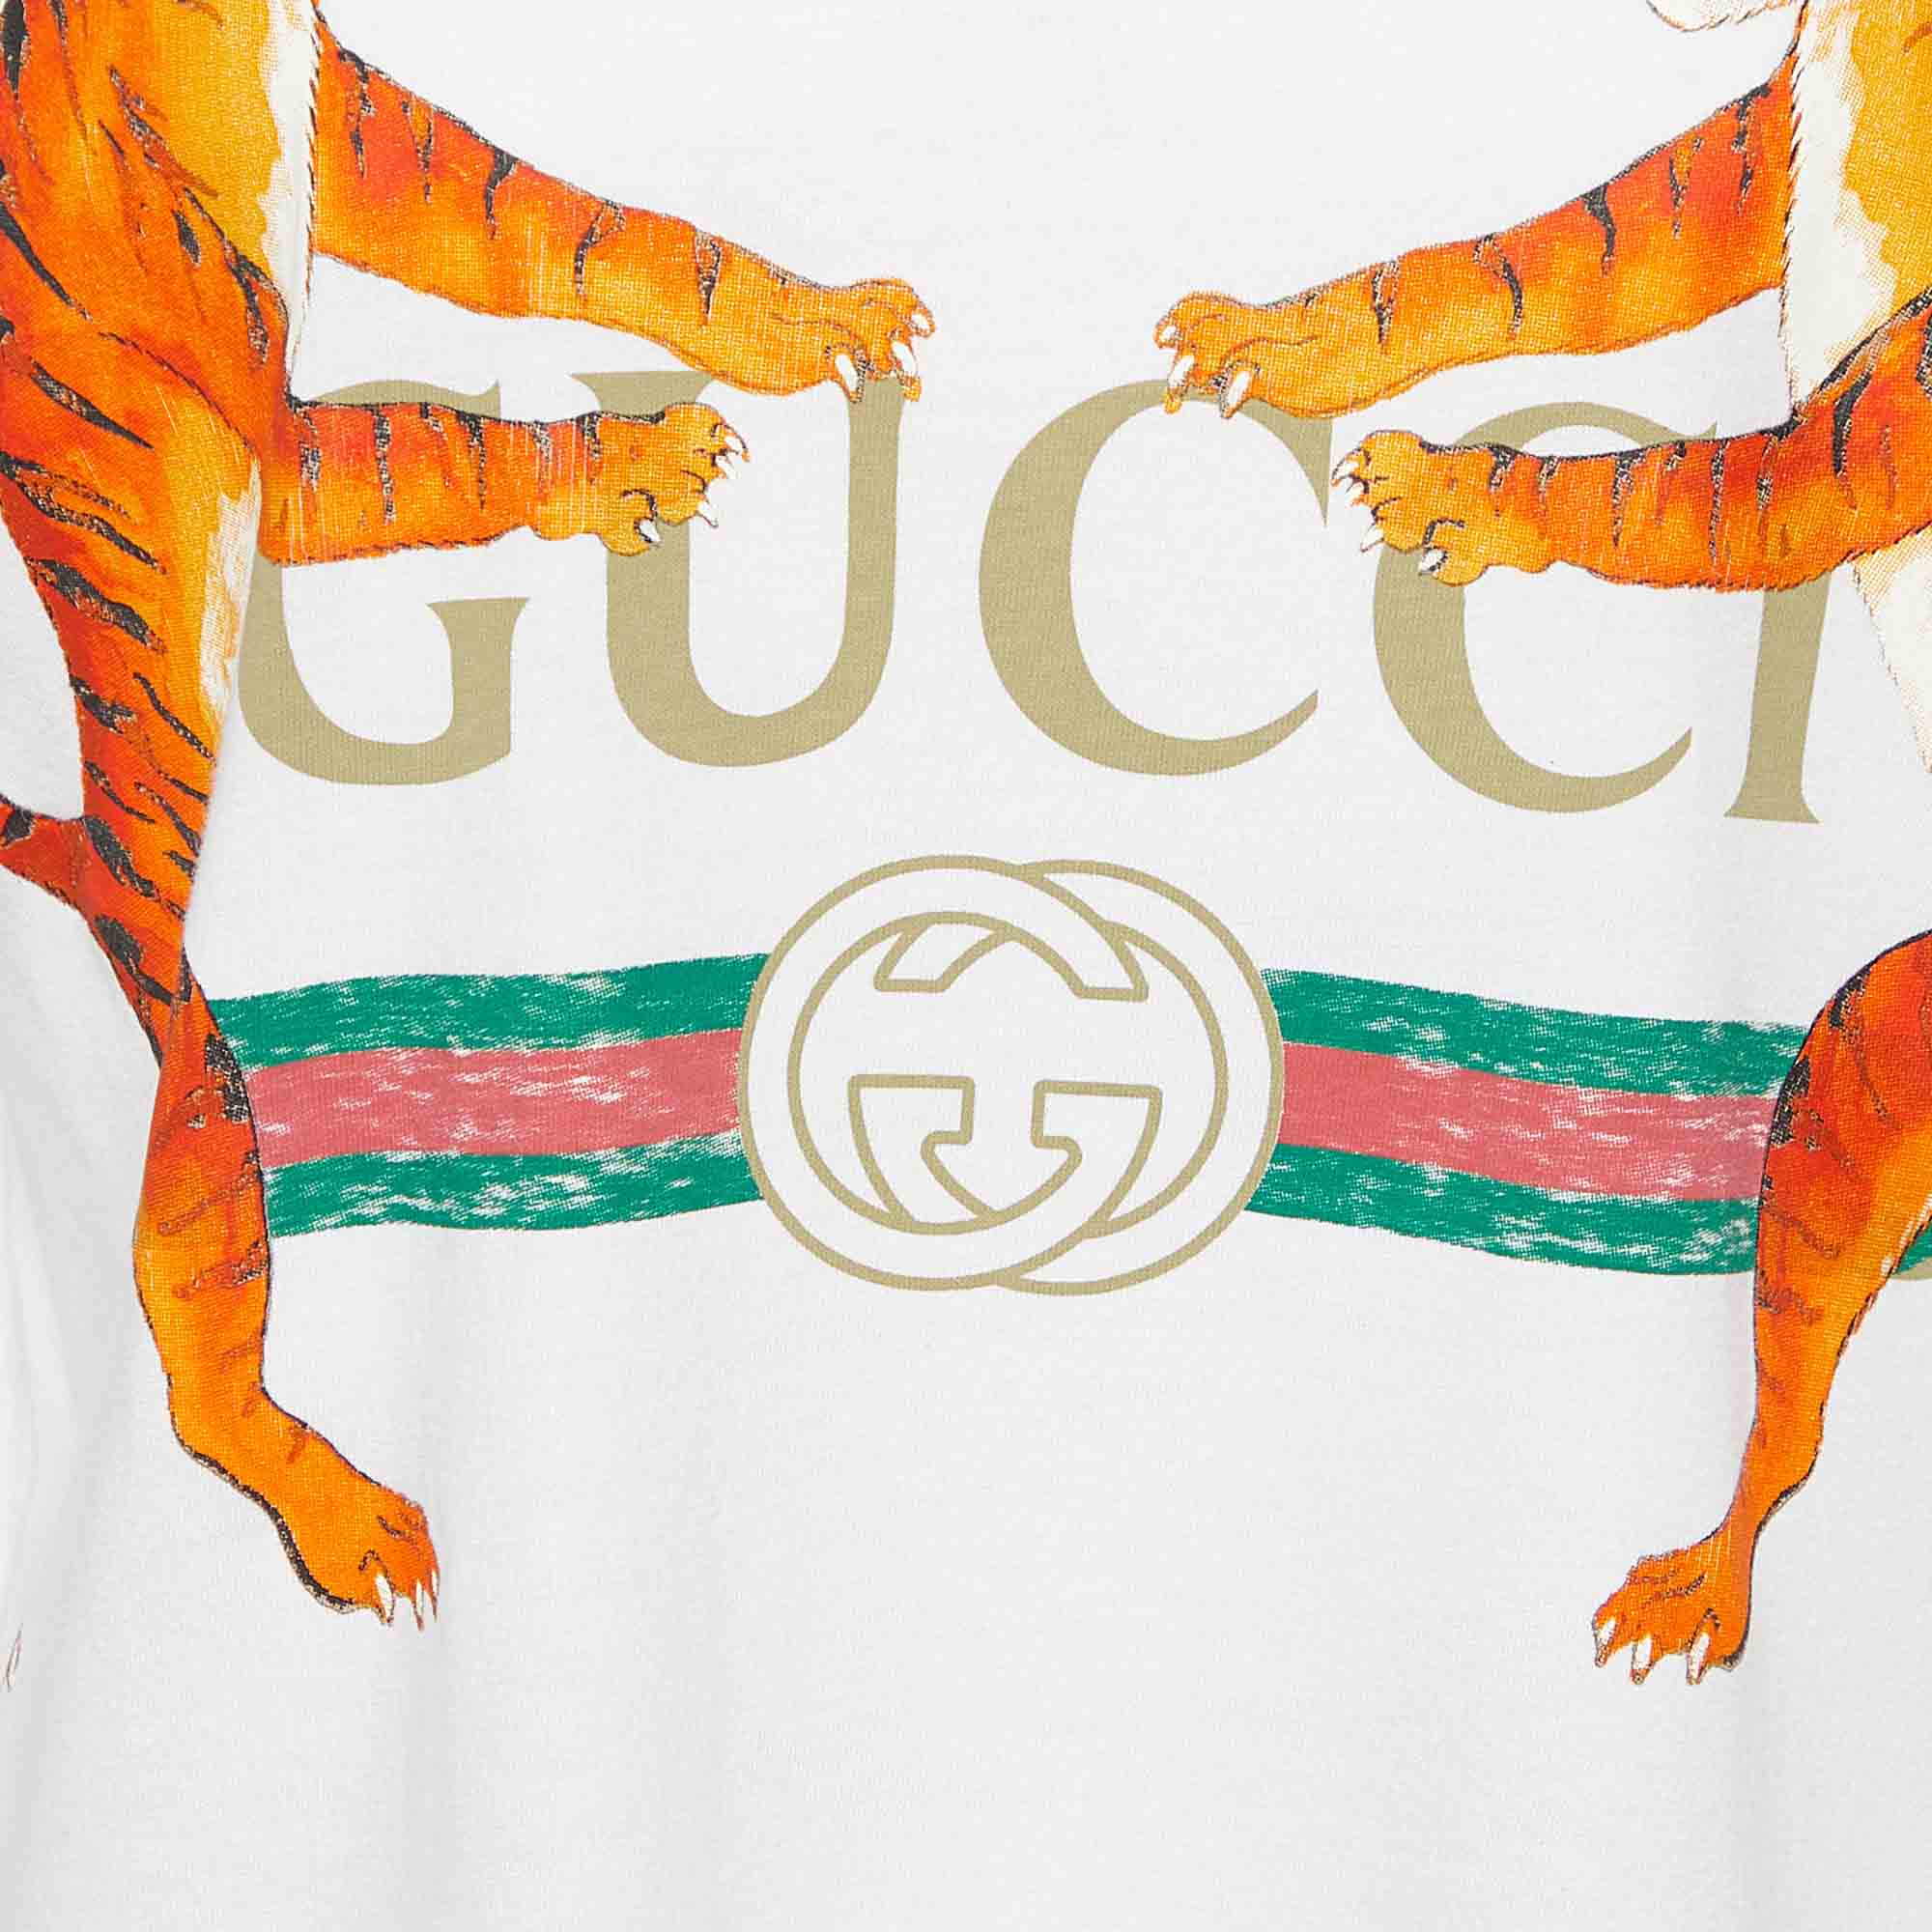 Gucci White Tiger Logo Printed Cotton Knit Oversized T-Shirt S